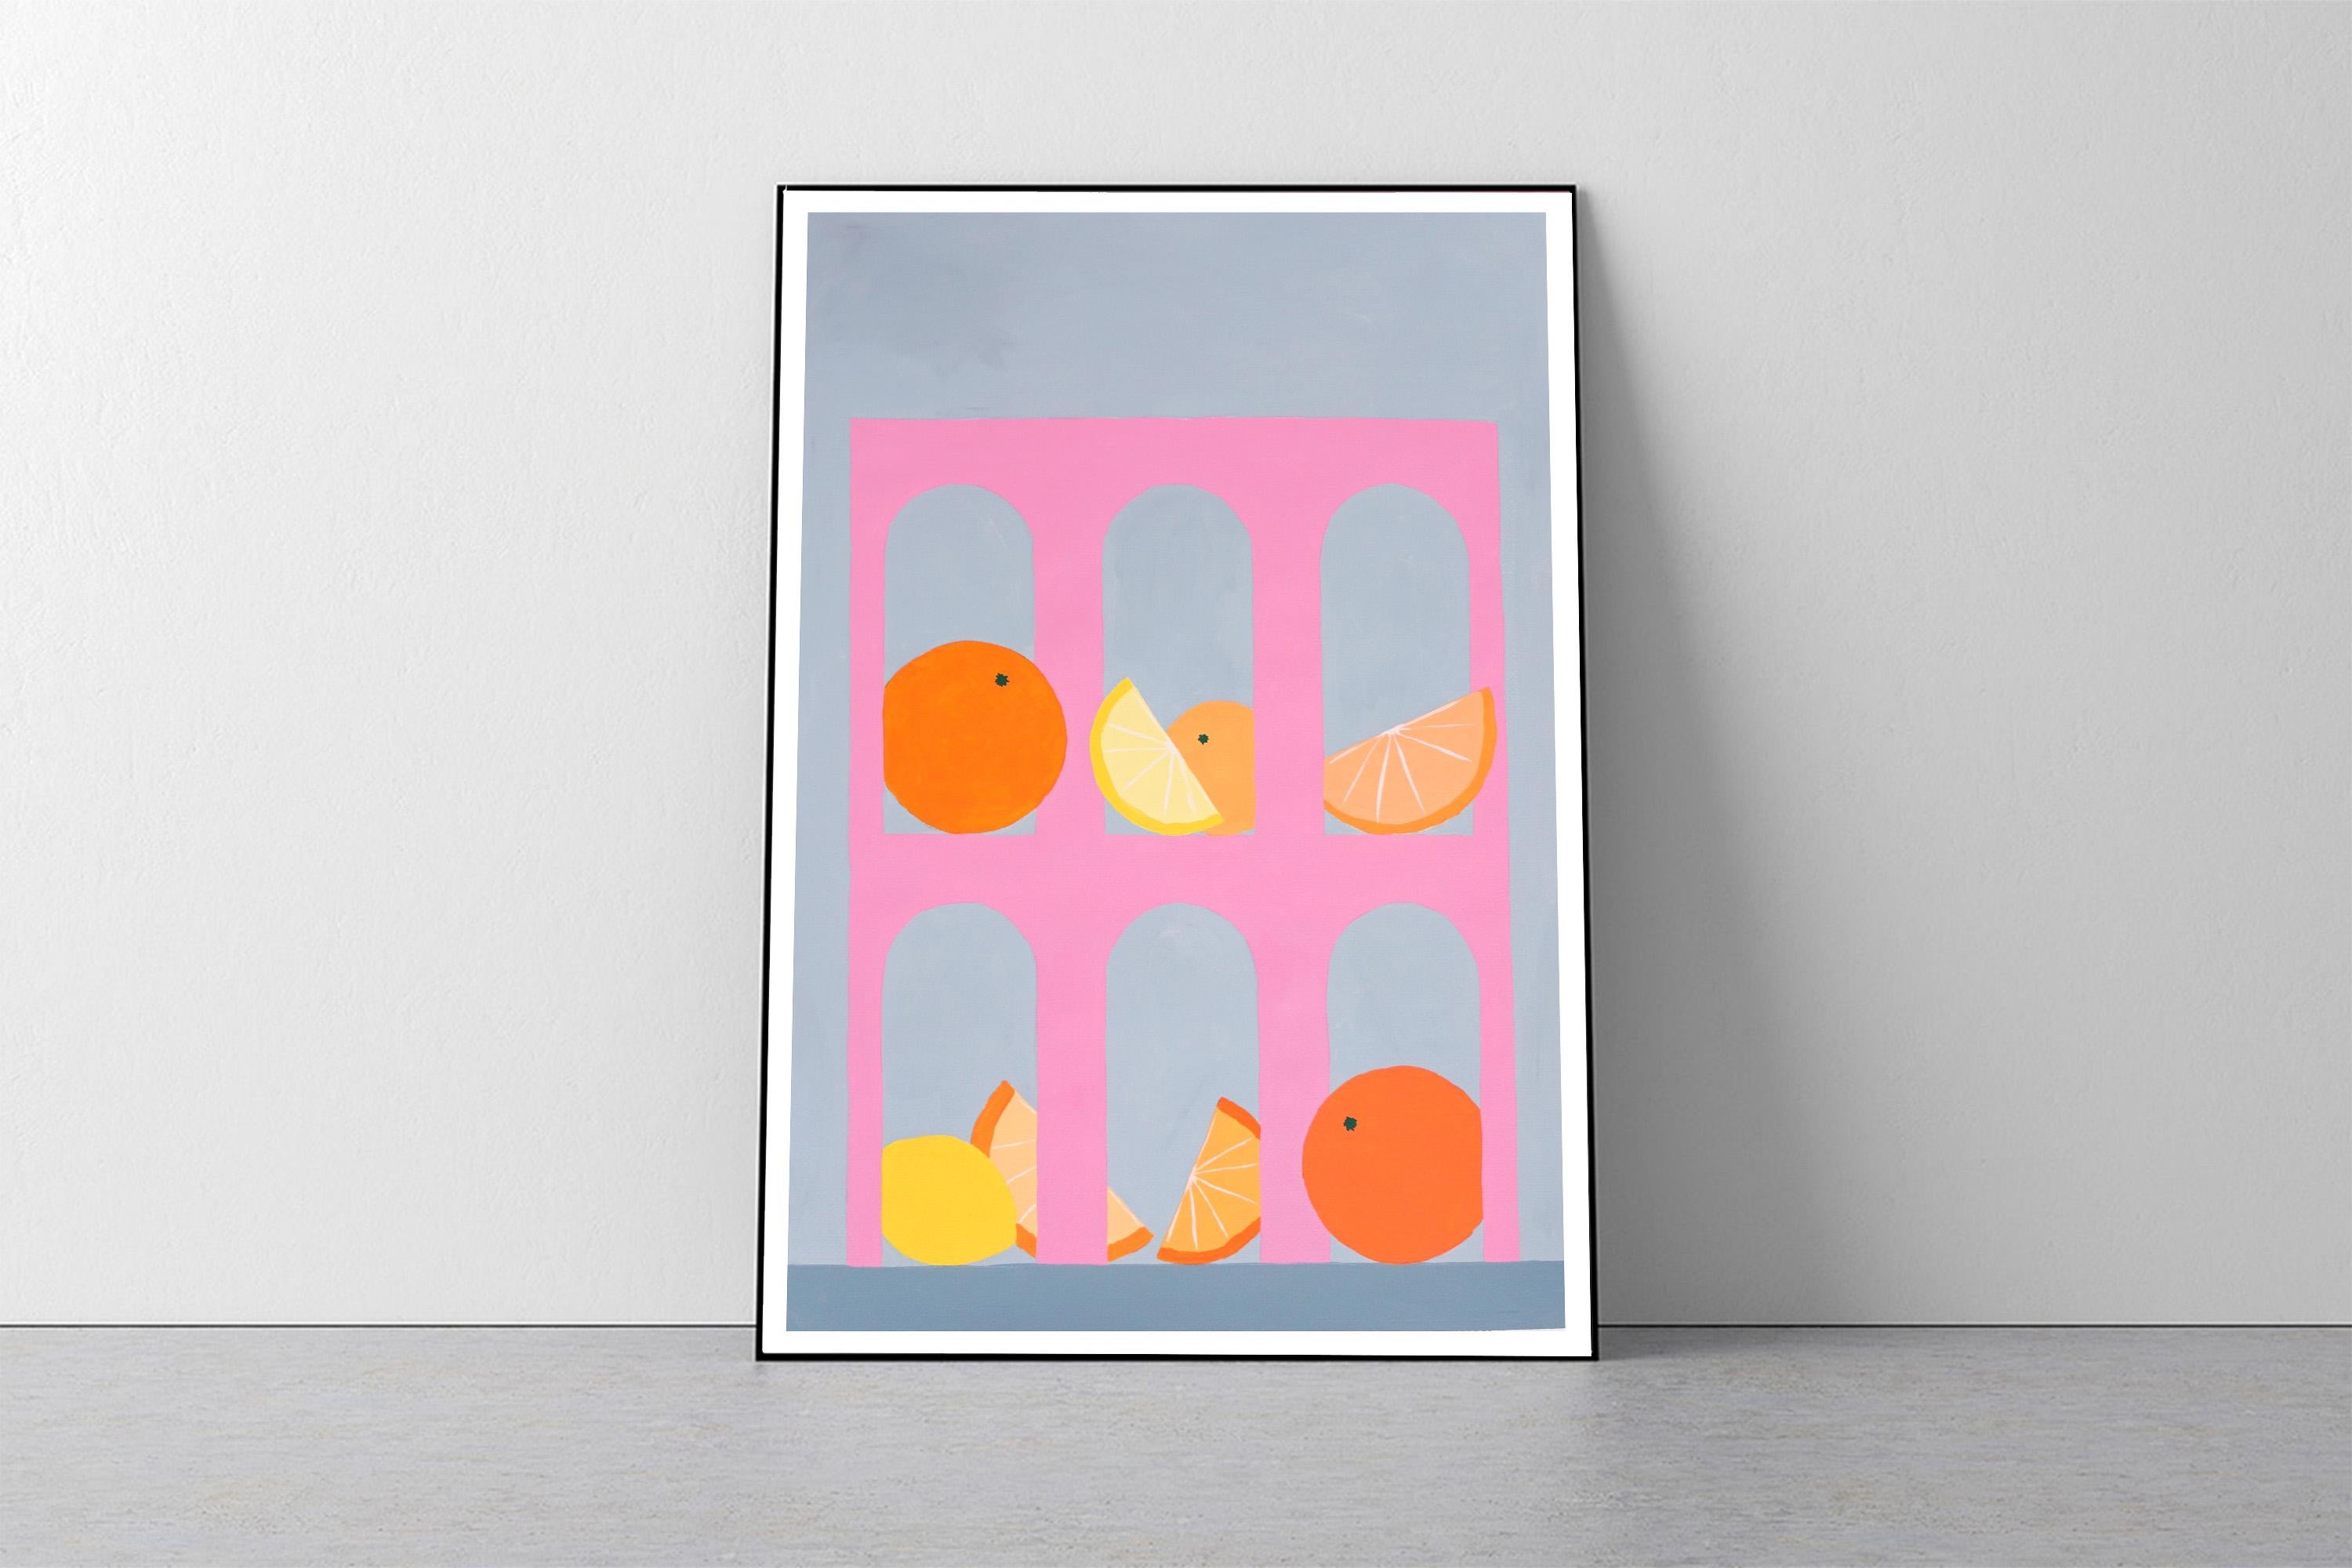 Minimalist Pink Arcs with Citrus Fruits, Modern Still Life, Limes, Oranges, Gray - Painting by Gio Bellagio